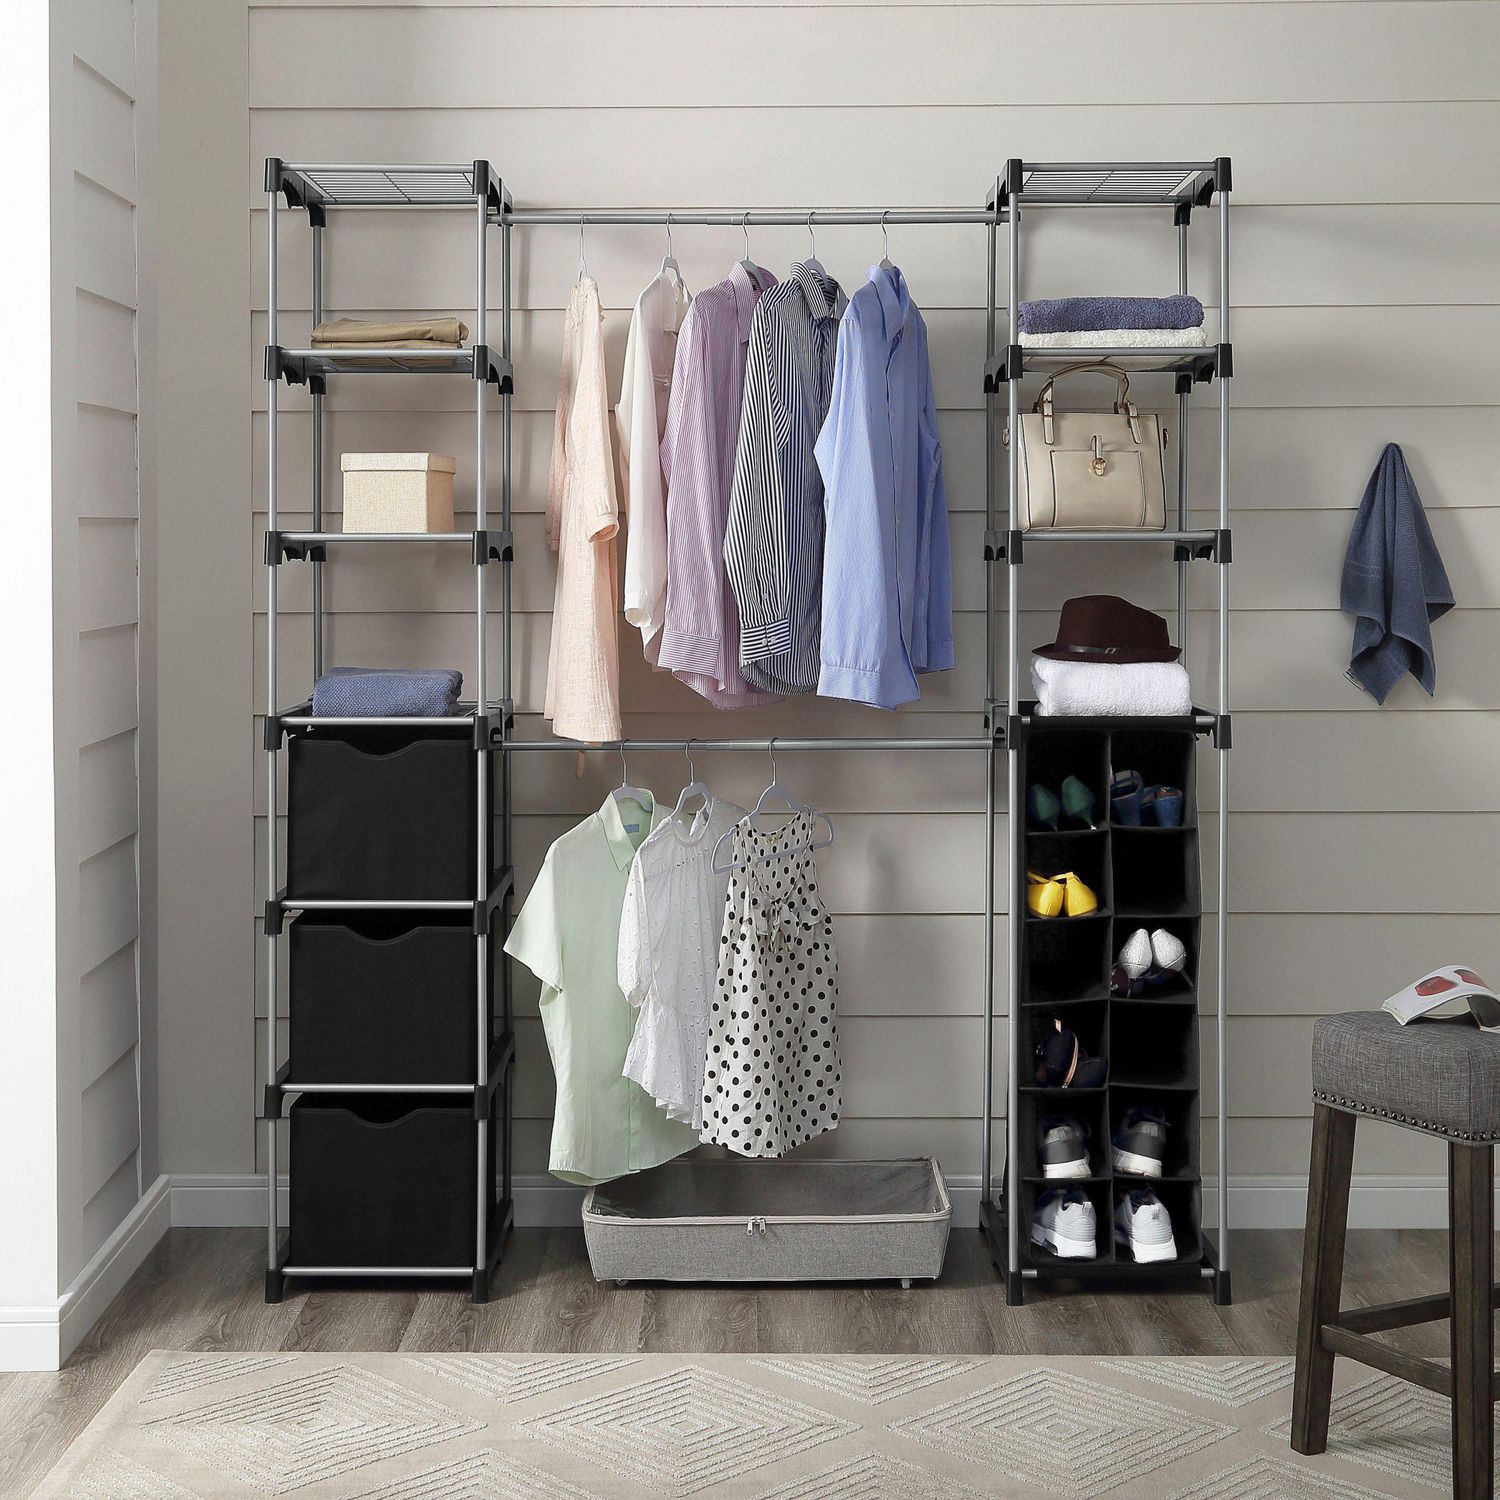 Mainstays Closet Organizer With Storage 2 Tower 9 Shelves Easy To Assemble Black Walmart Canada